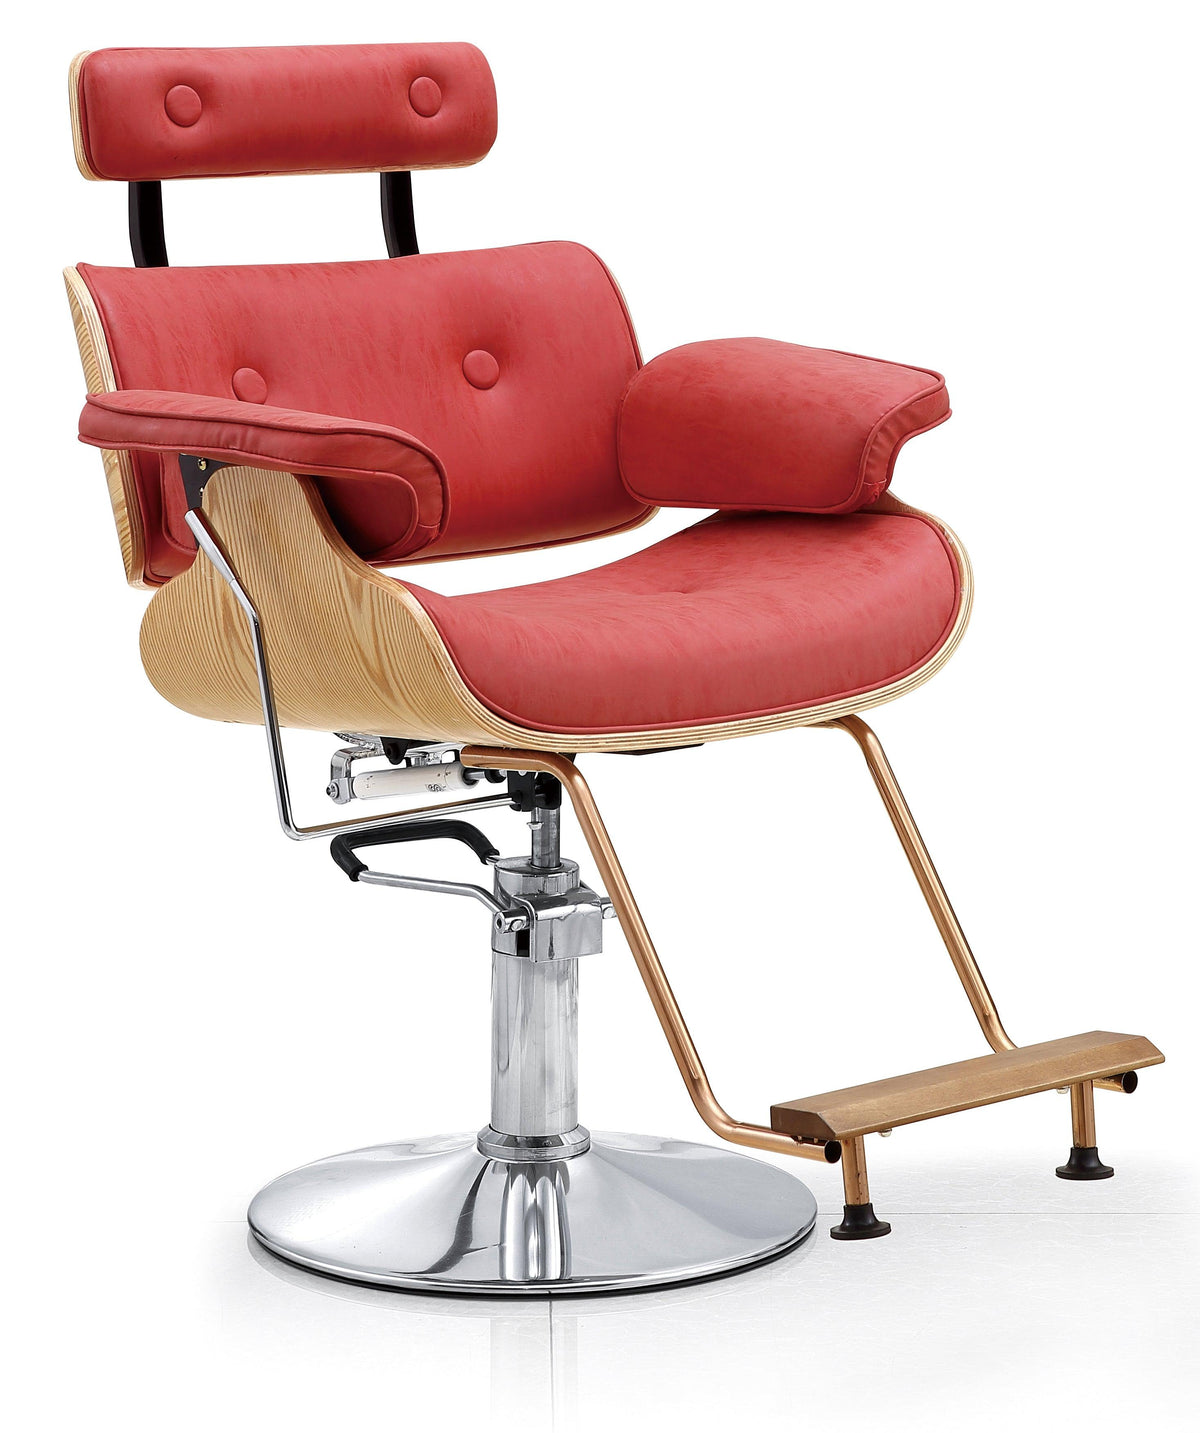 ELEANOR Stylish Red Salon Chair with Wood Finish Back - Northern Interiors